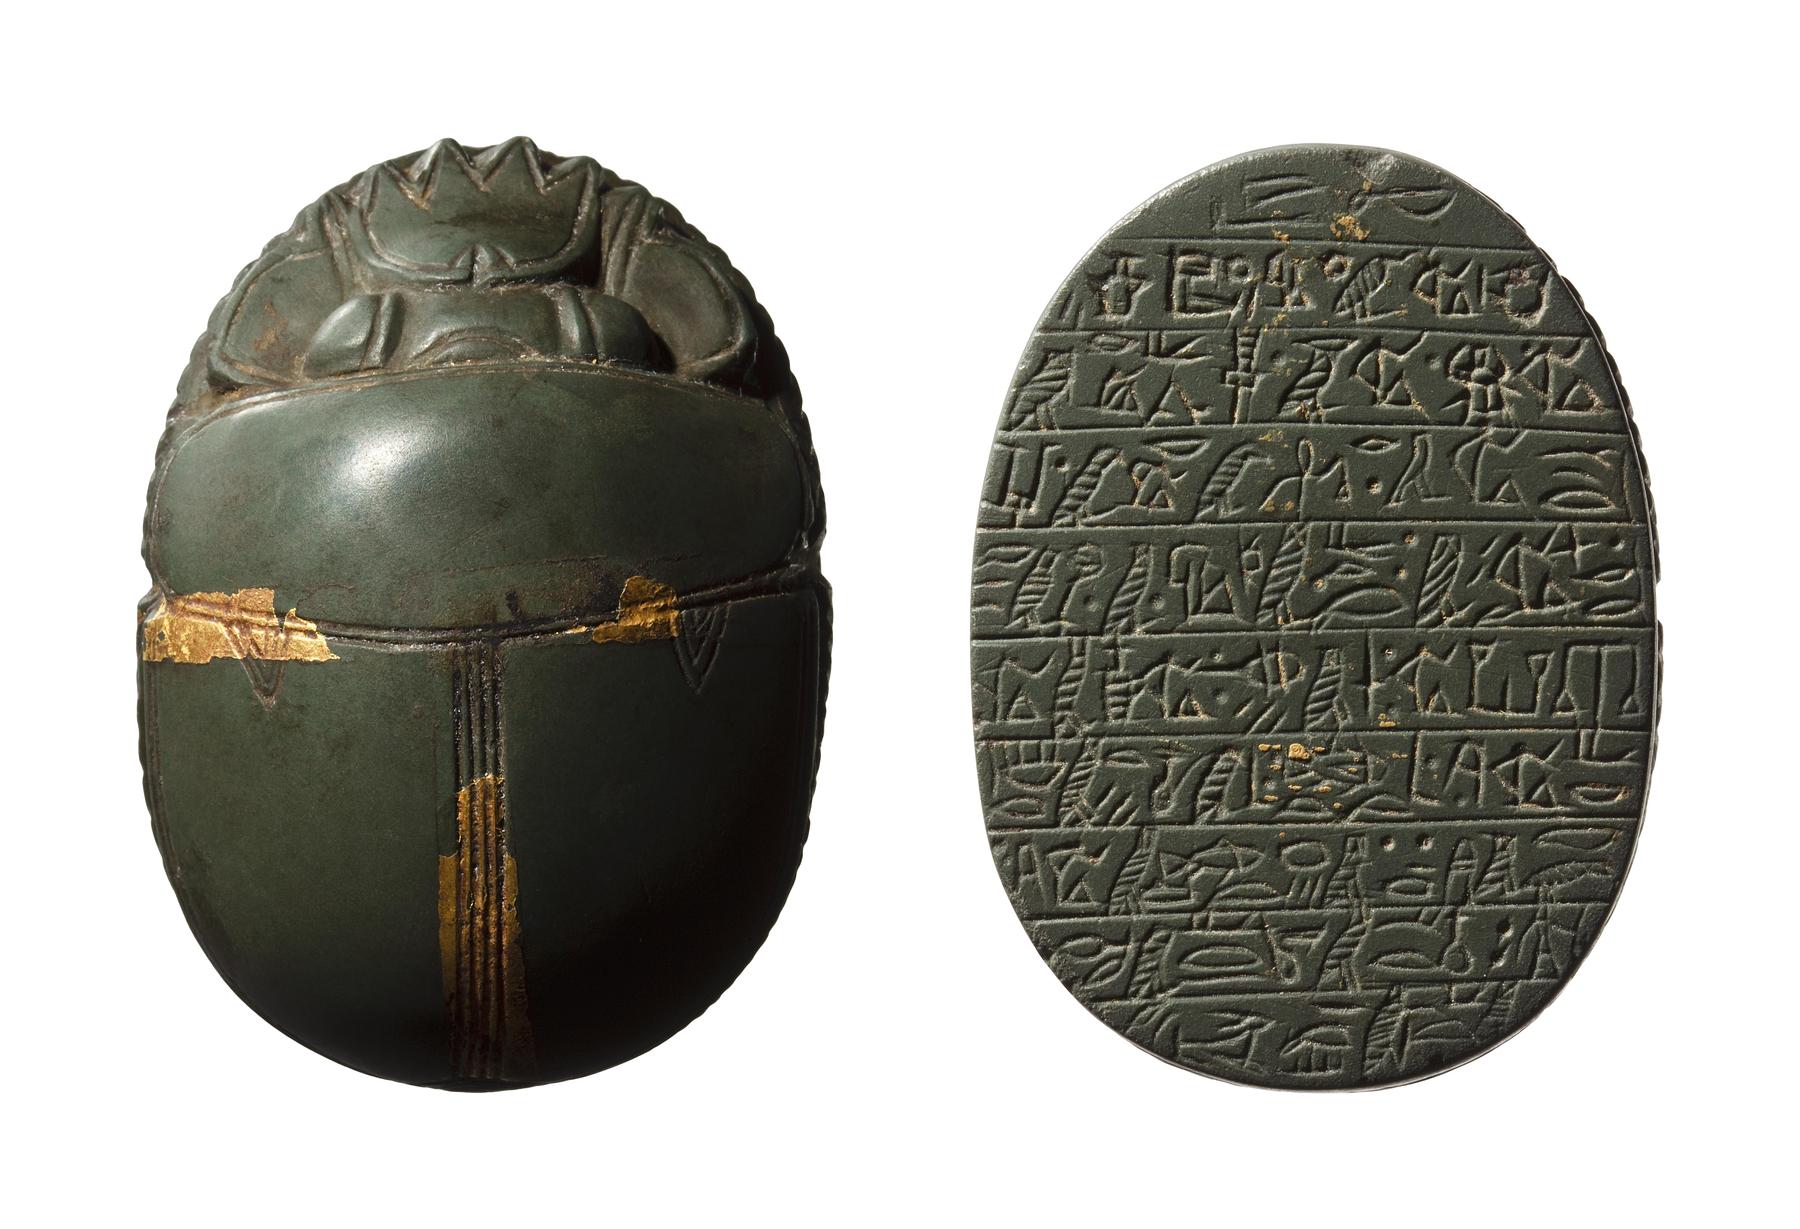 Scarab with hieroglyphic inscription from The Book of the Dead, H406